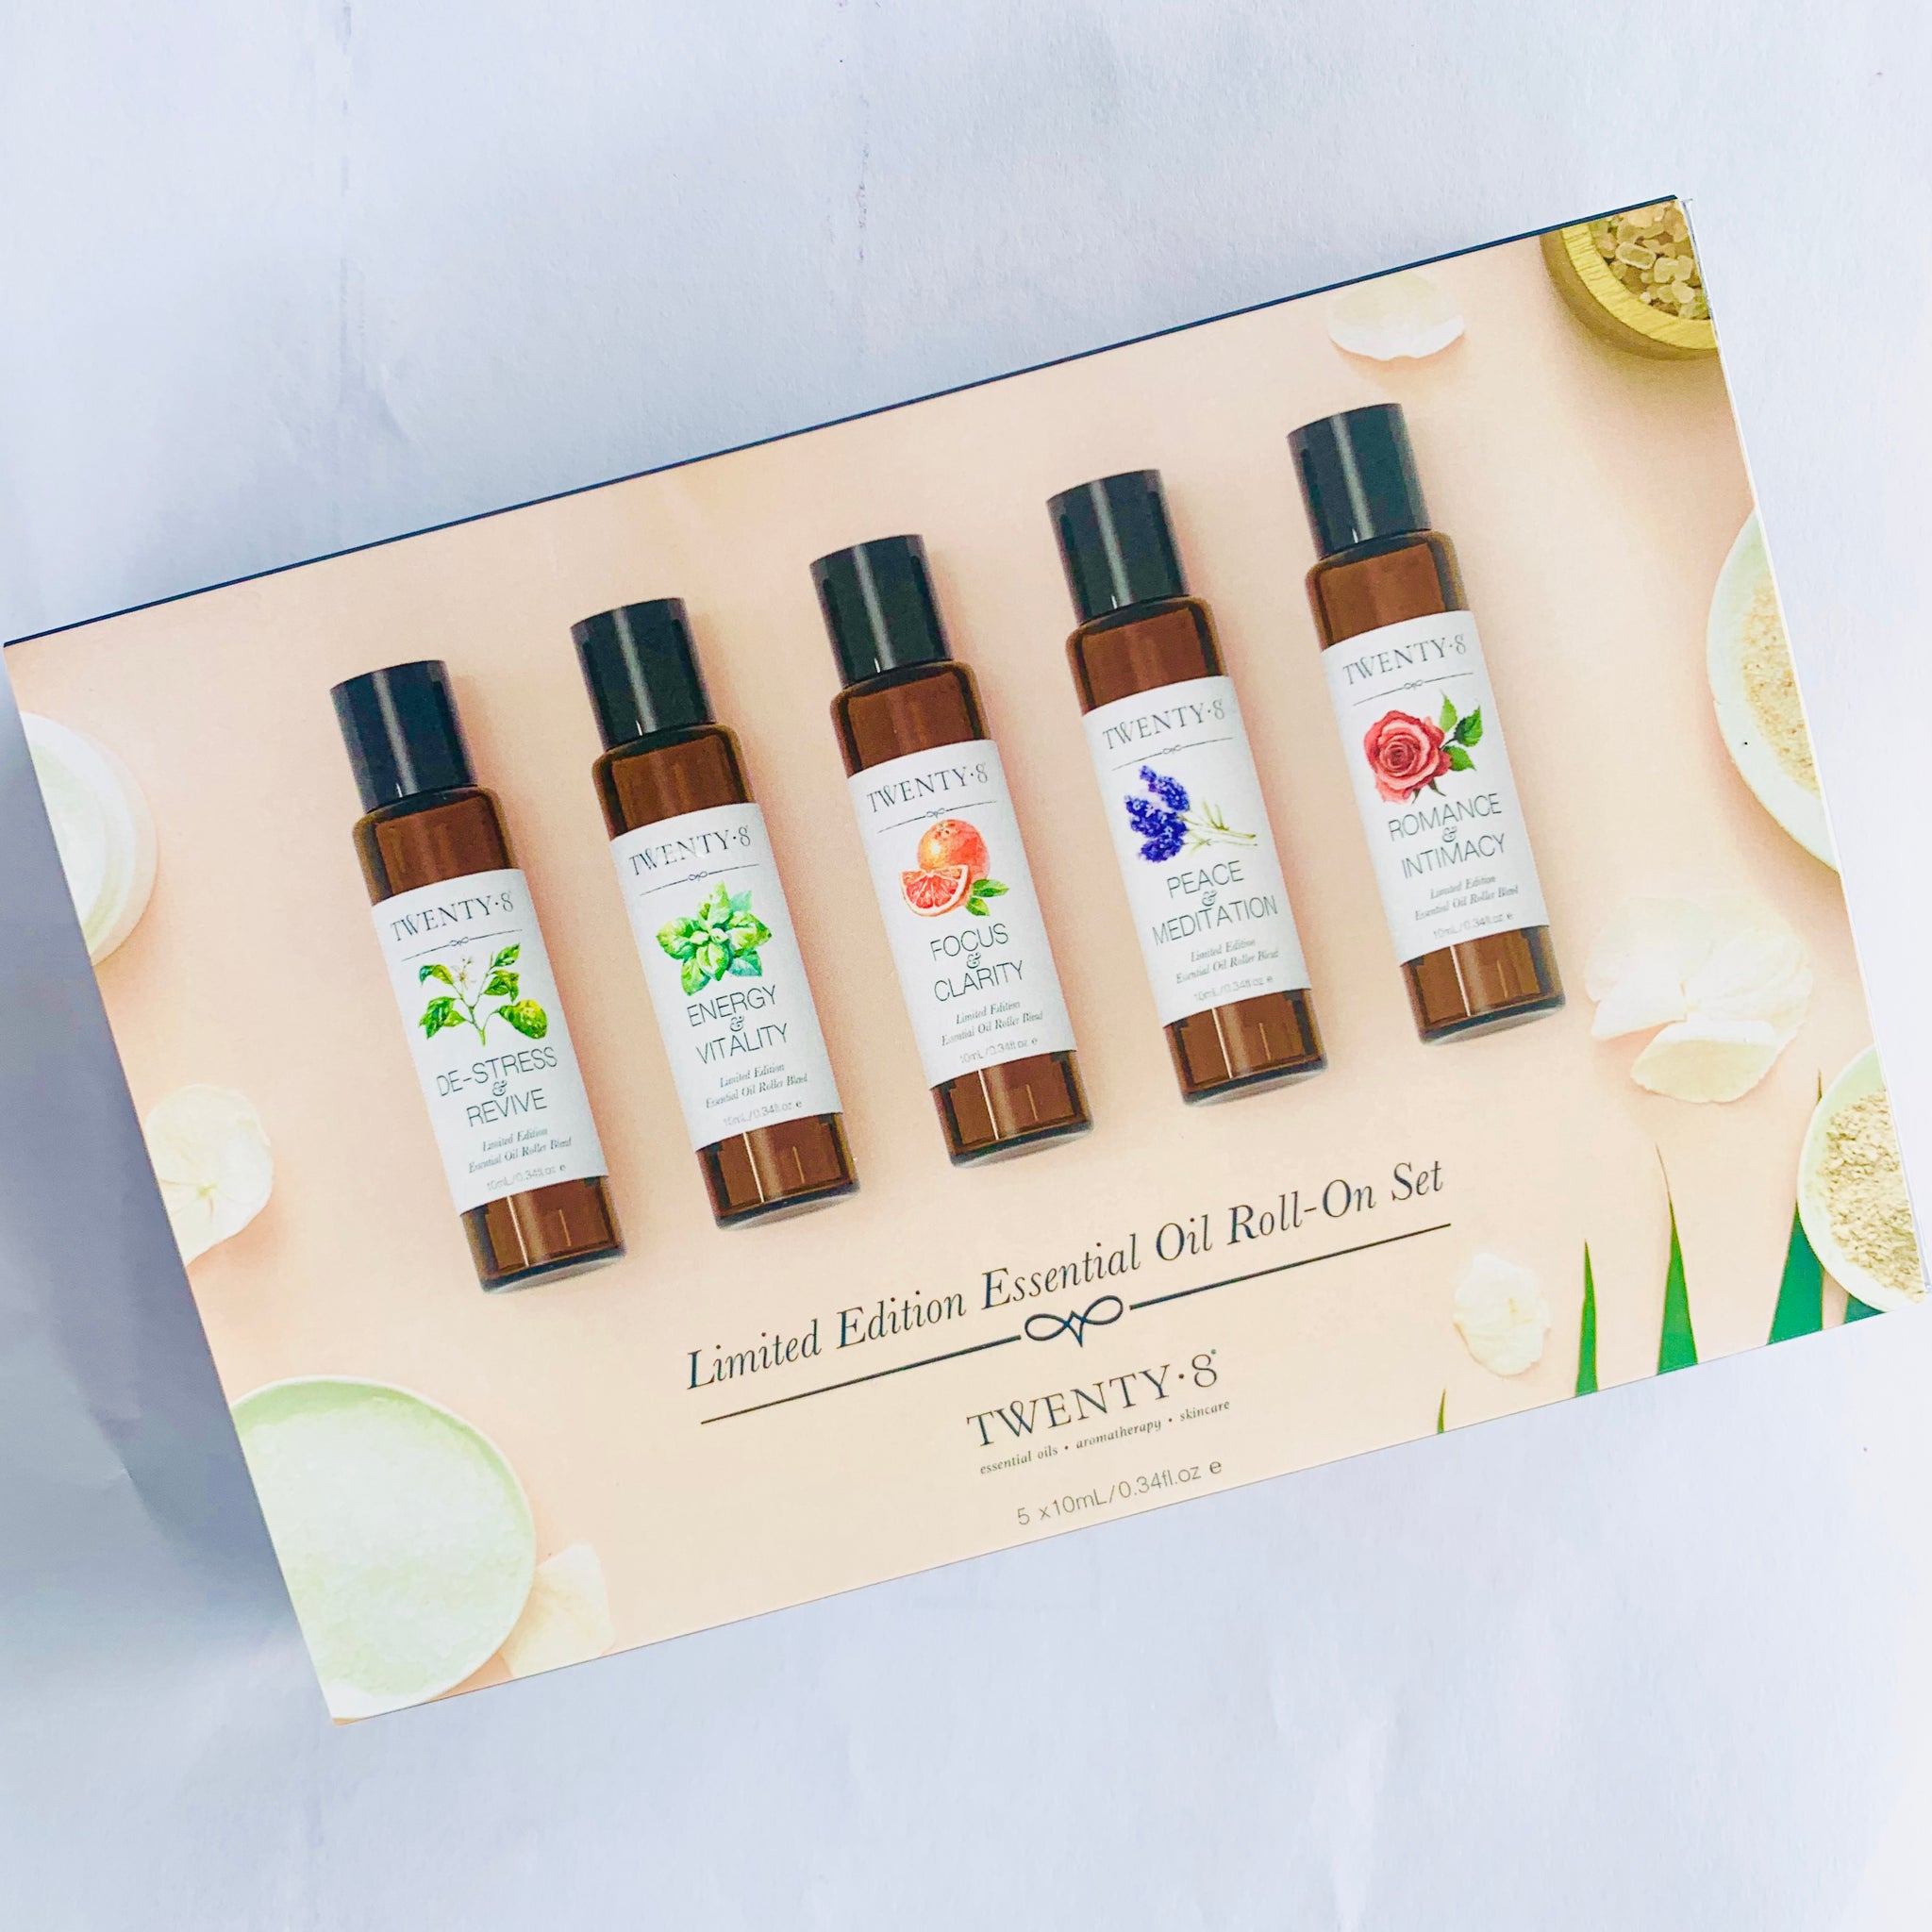 Essential Oil Roller Blend Collection by Twenty8